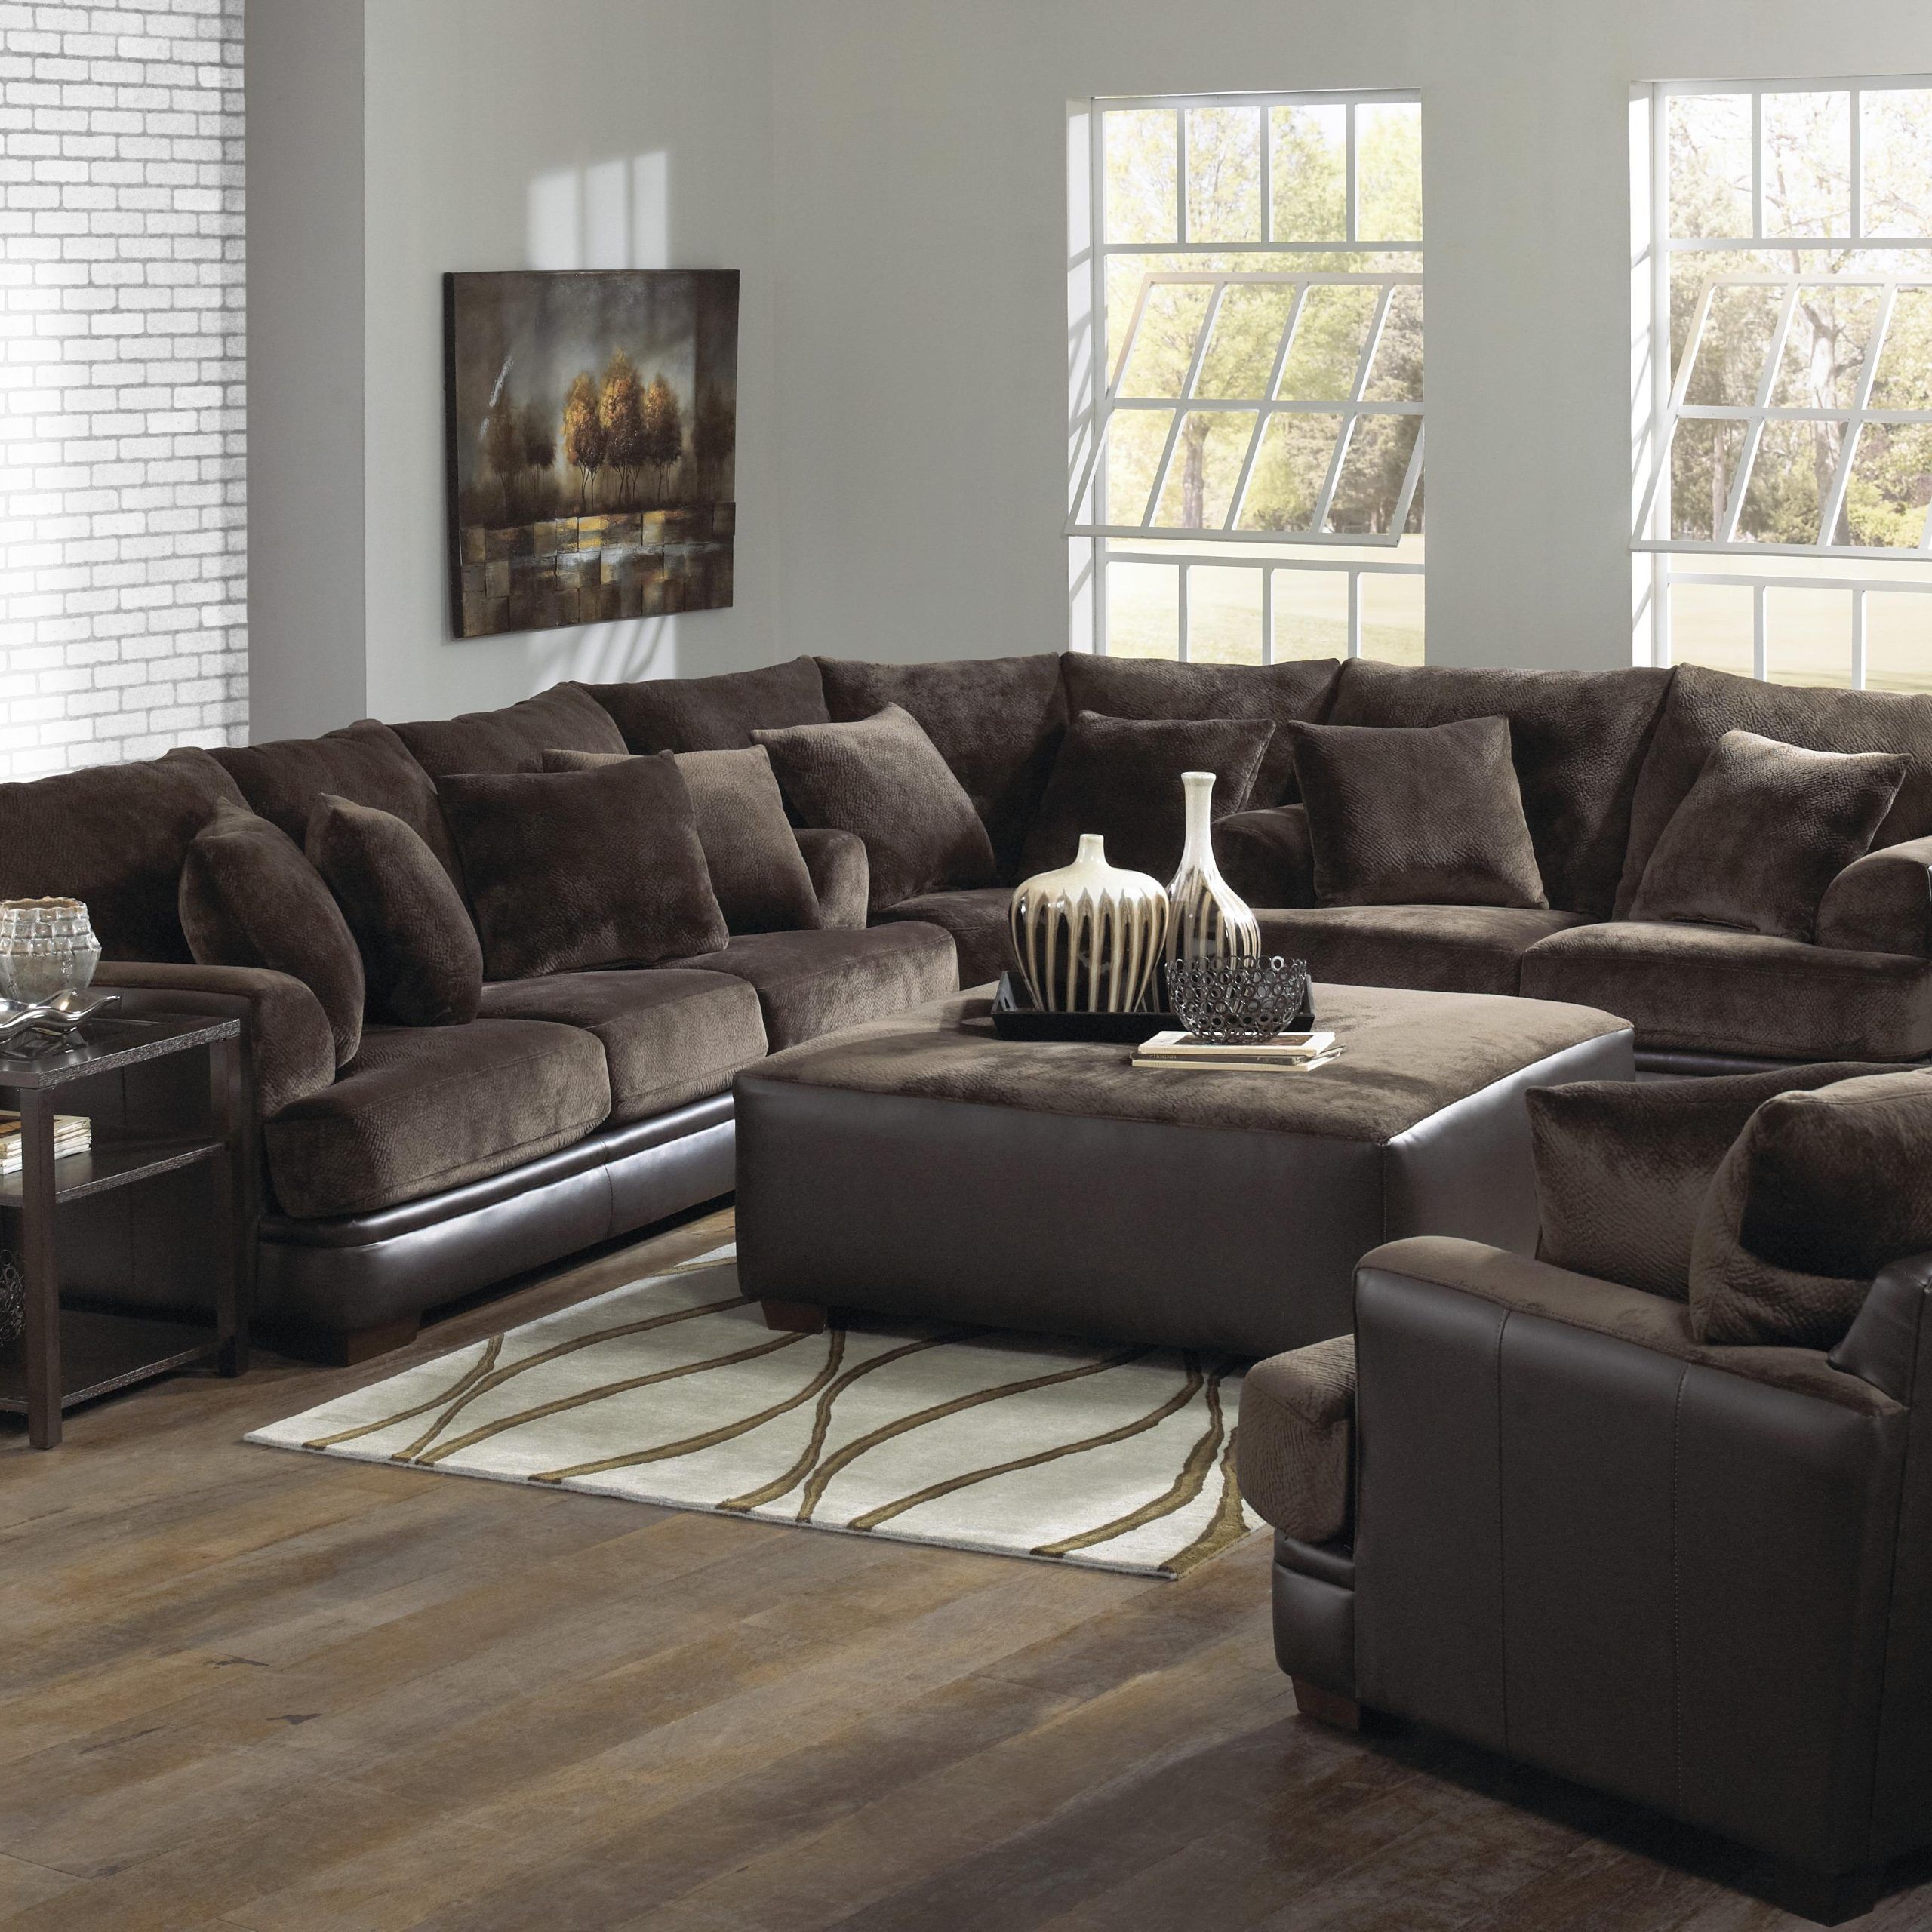 U Shaped Sectional With Chaise Design – Homesfeed Intended For Modern U Shaped Sectional Couch Sets (View 13 of 20)